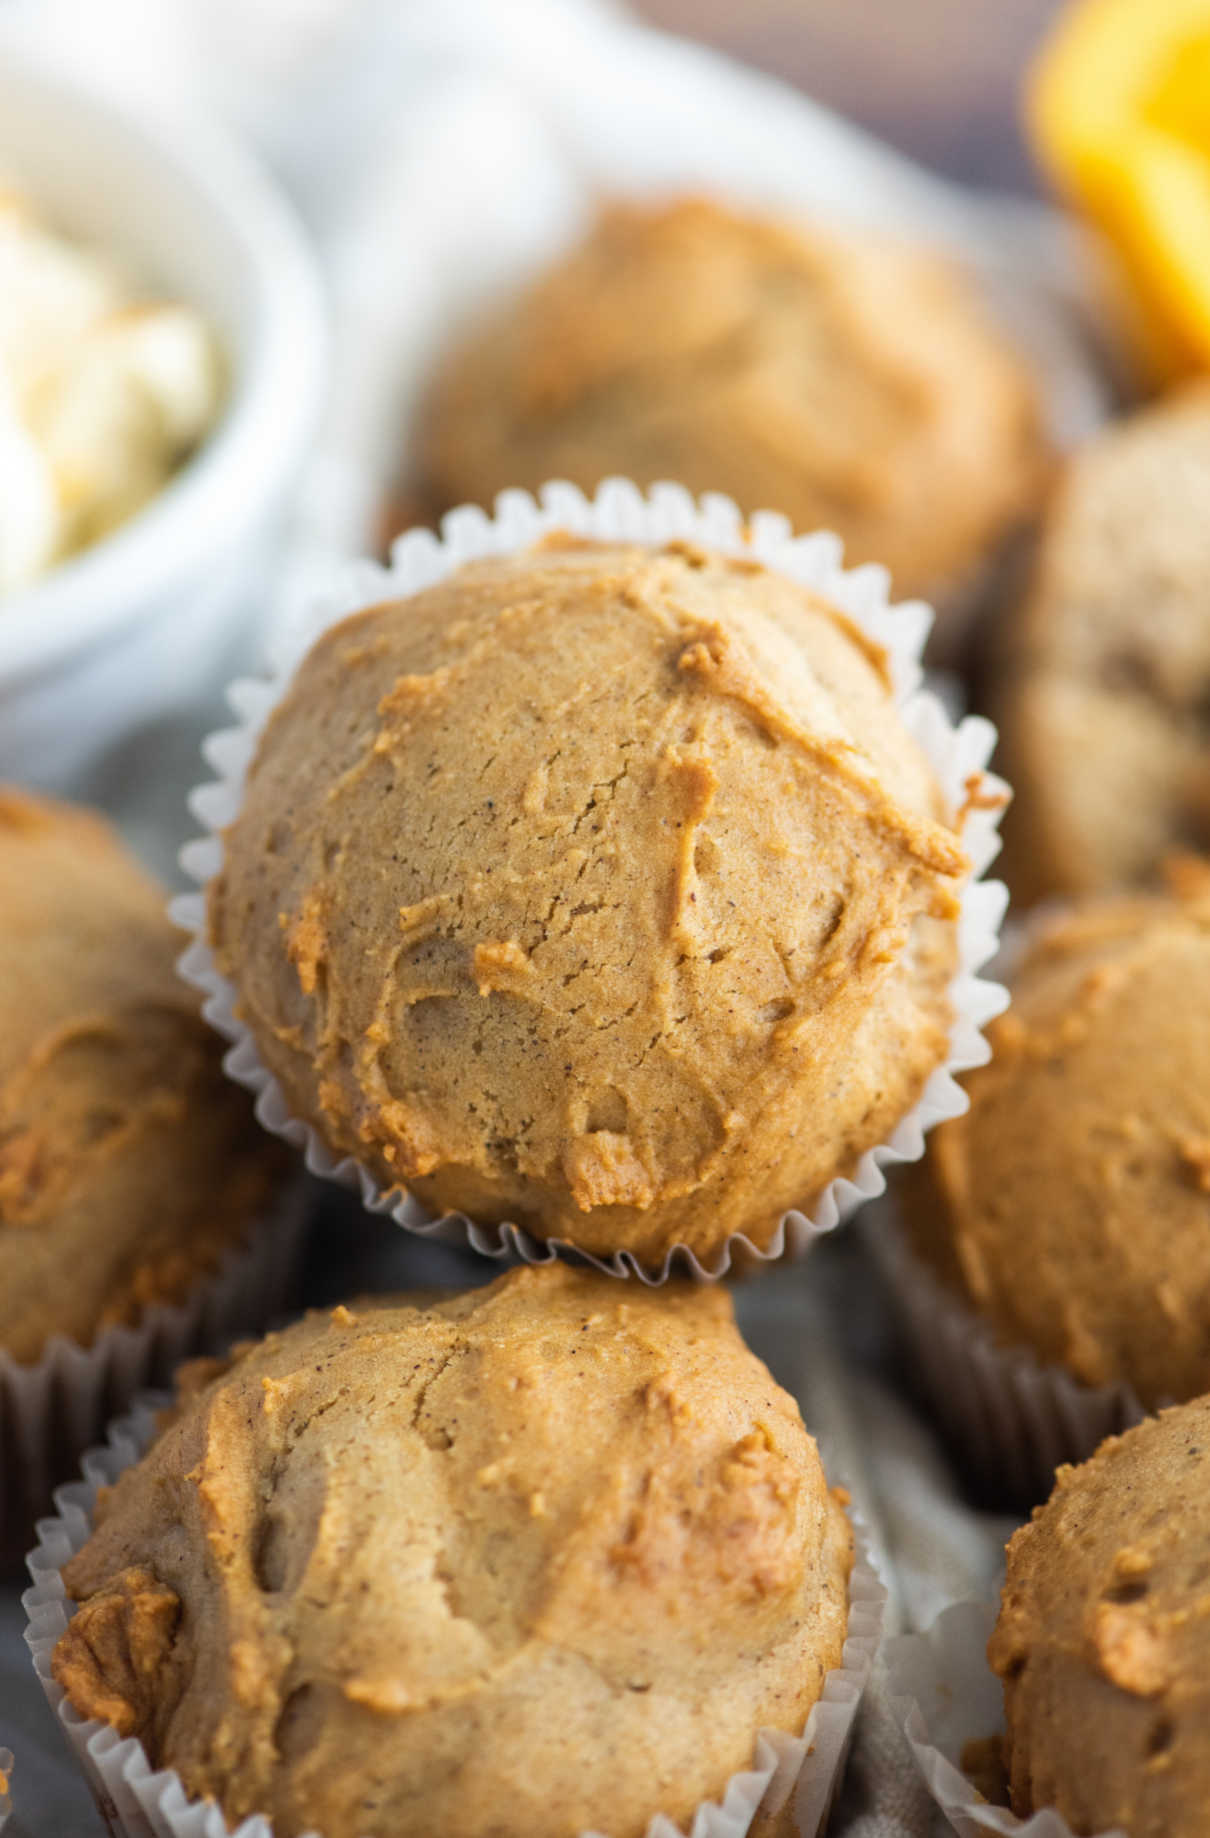 Freshly baked orange spice muffins with white paper wrappers.